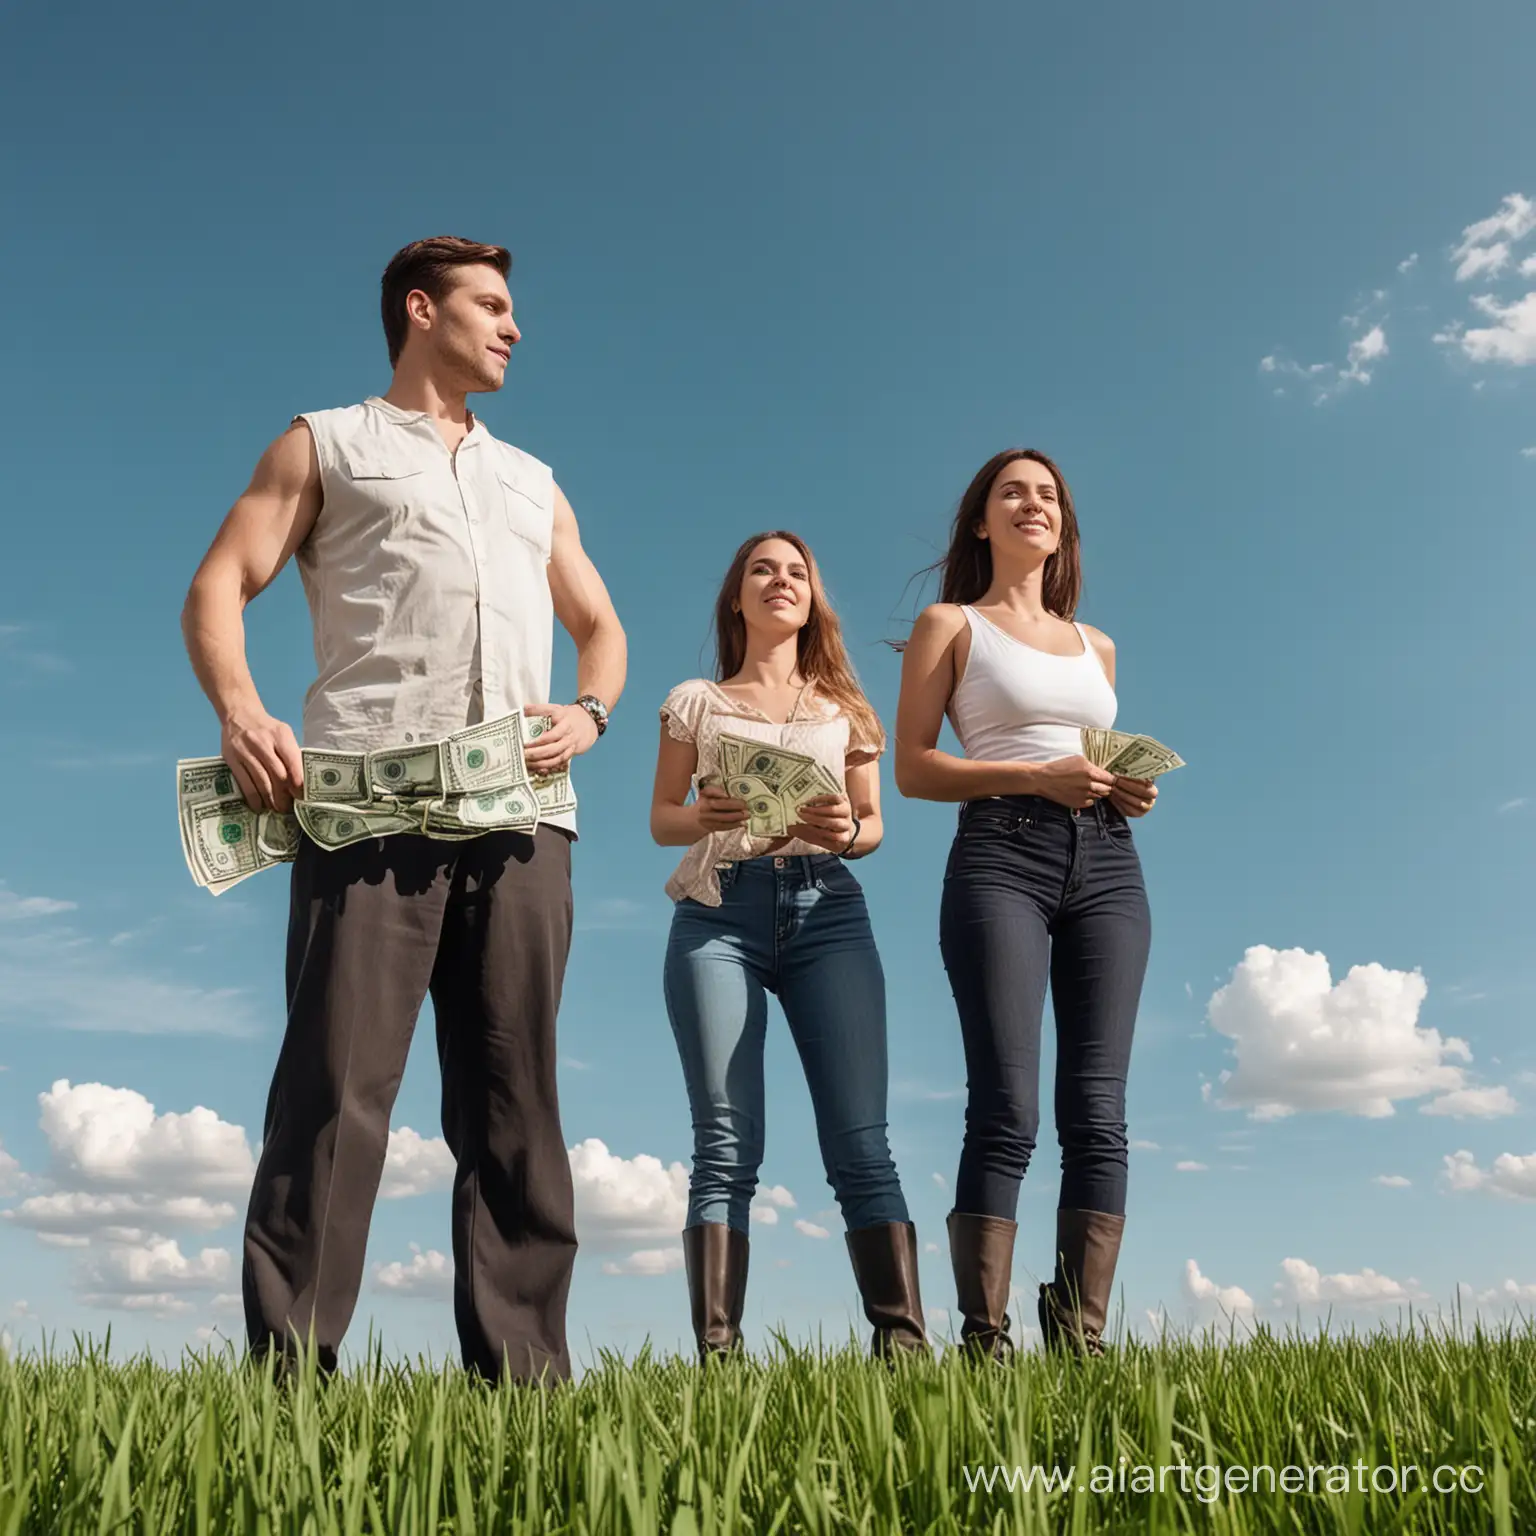 Successful-Couple-with-Money-Against-Blue-Sky-on-Green-Grass